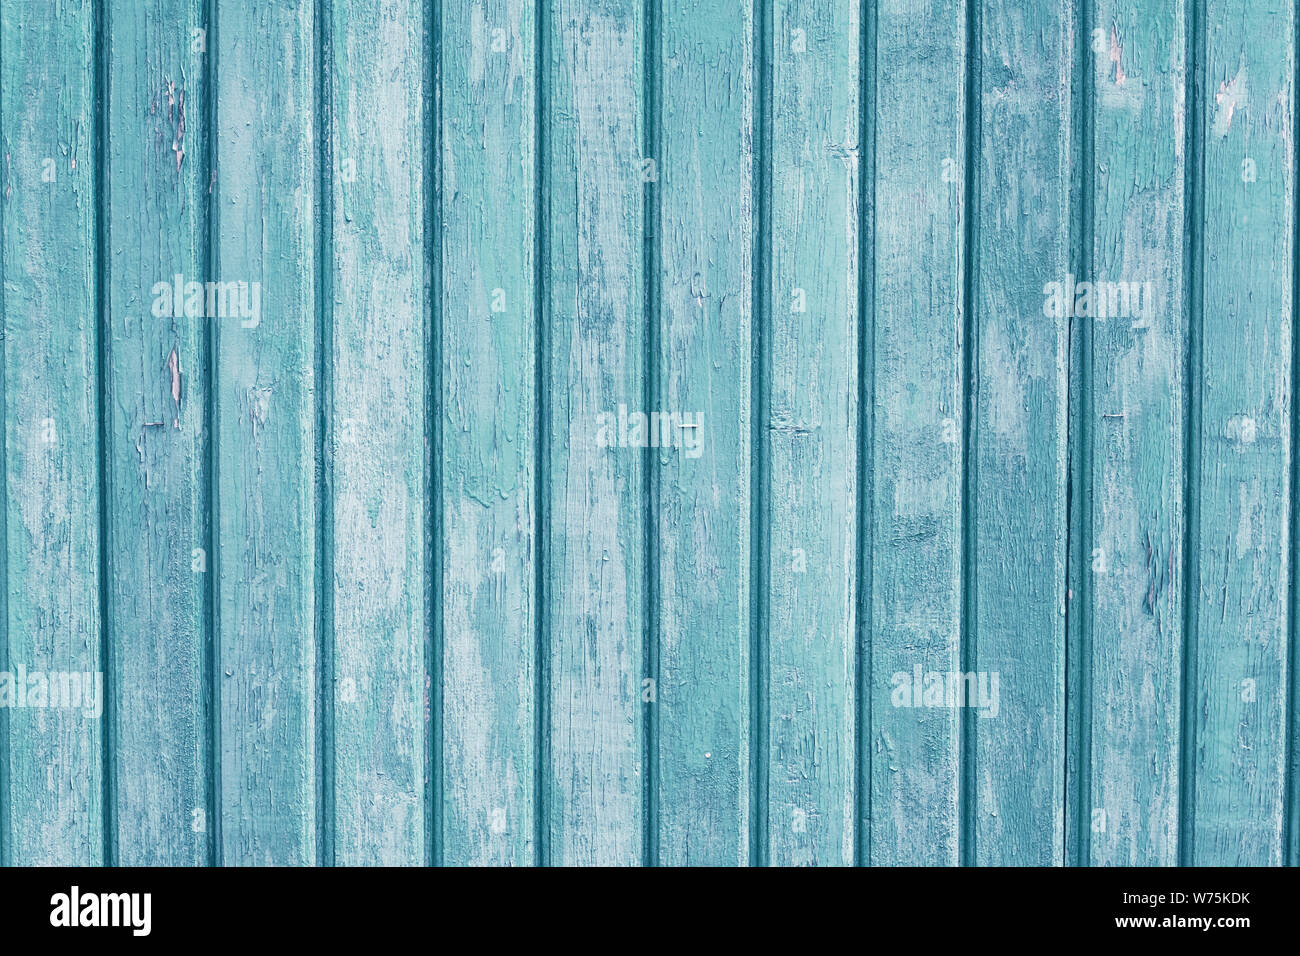 Turquoise vertical wooden planks. Blue, light green painted wood background. Vintage pattern for decorative design.  Old table. Grain timber texture. Stock Photo